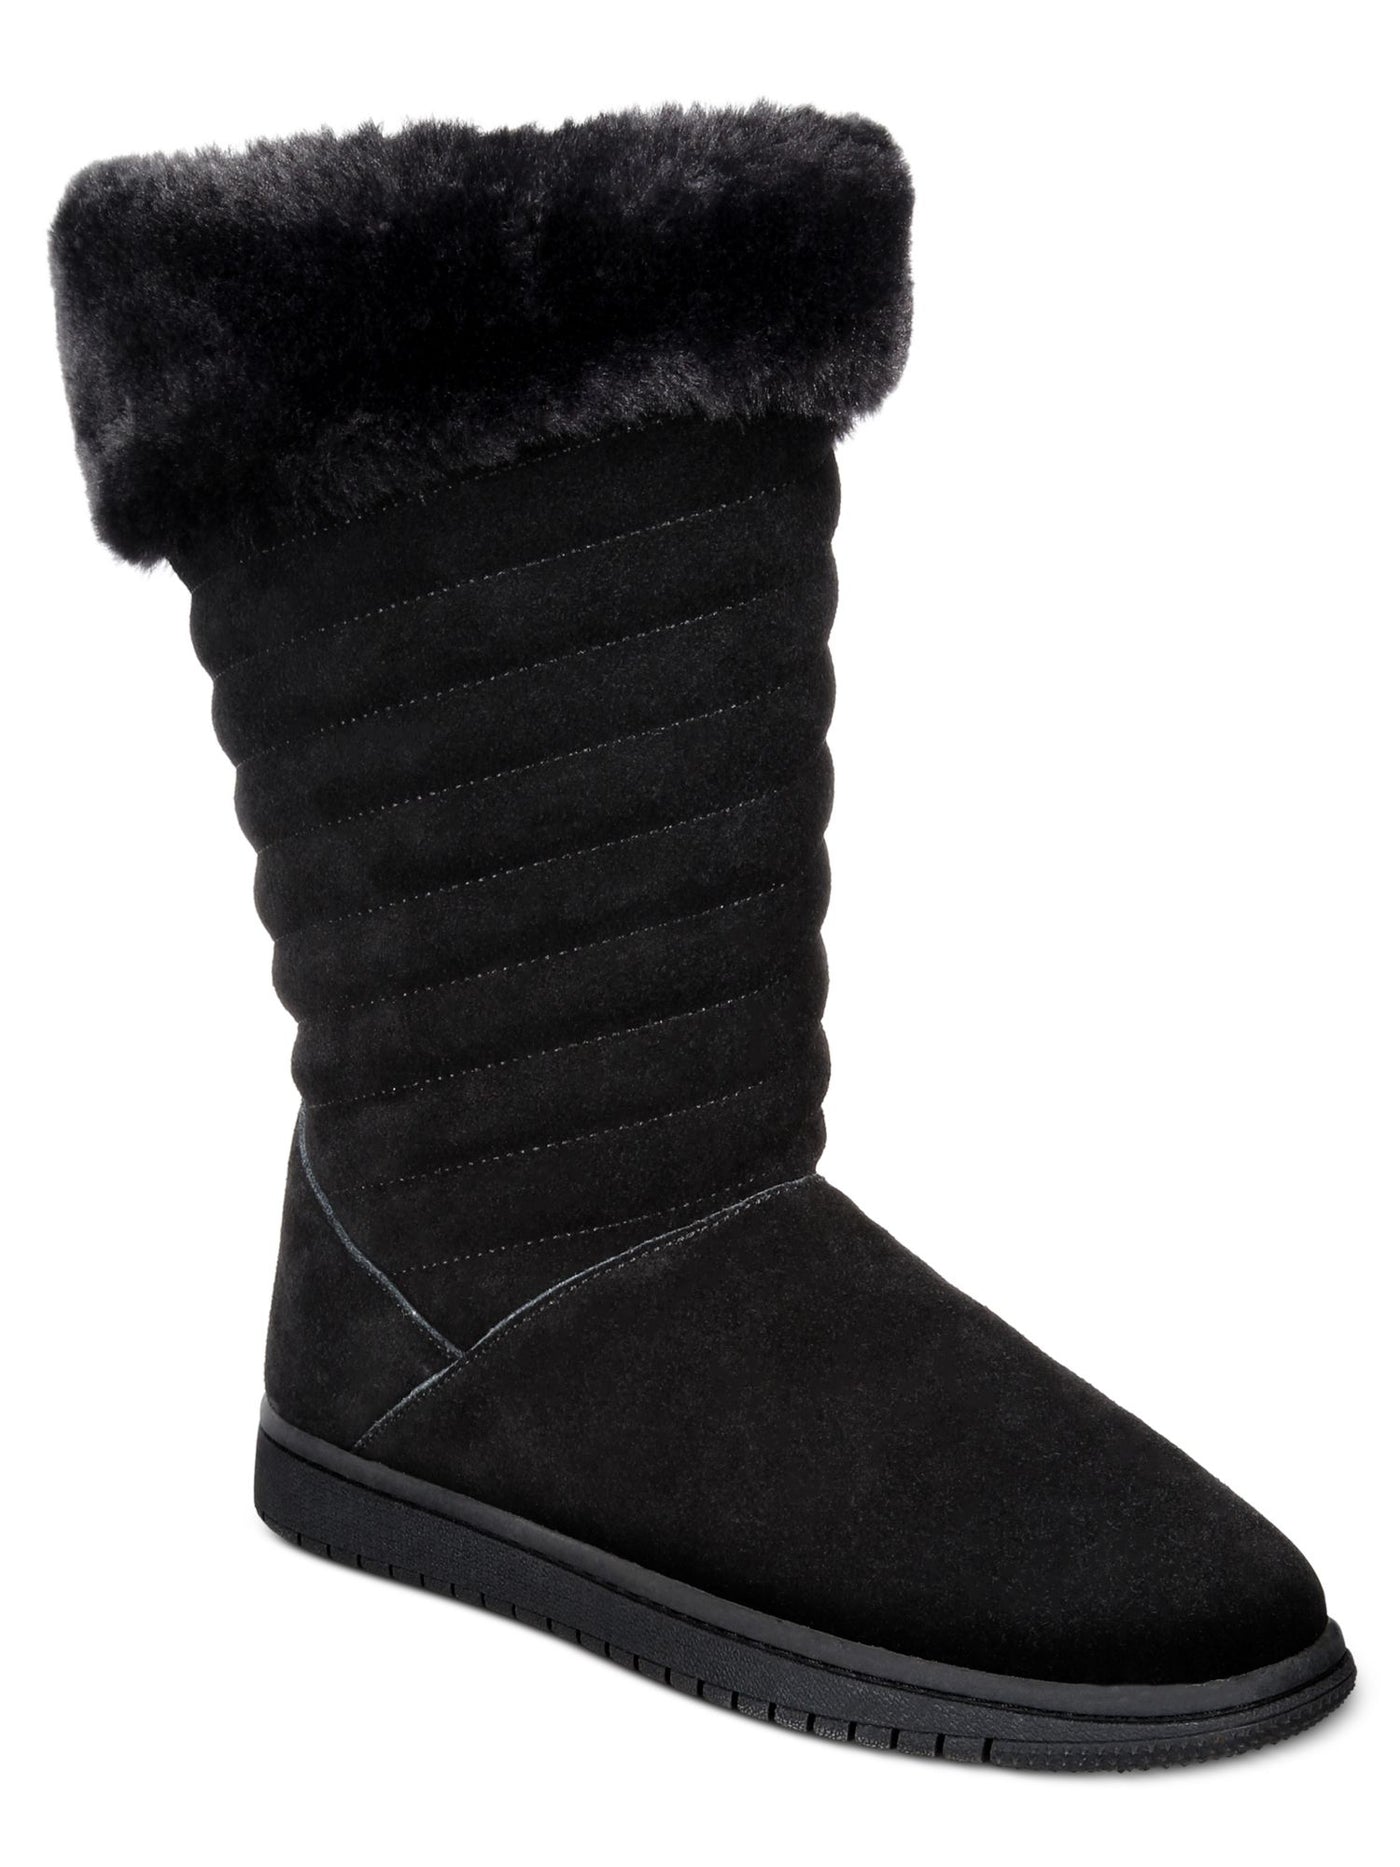 STYLE & COMPANY Womens Black Slip Resistant Quilted Insulated Novaa Round Toe Platform Leather Snow Boots 9 M